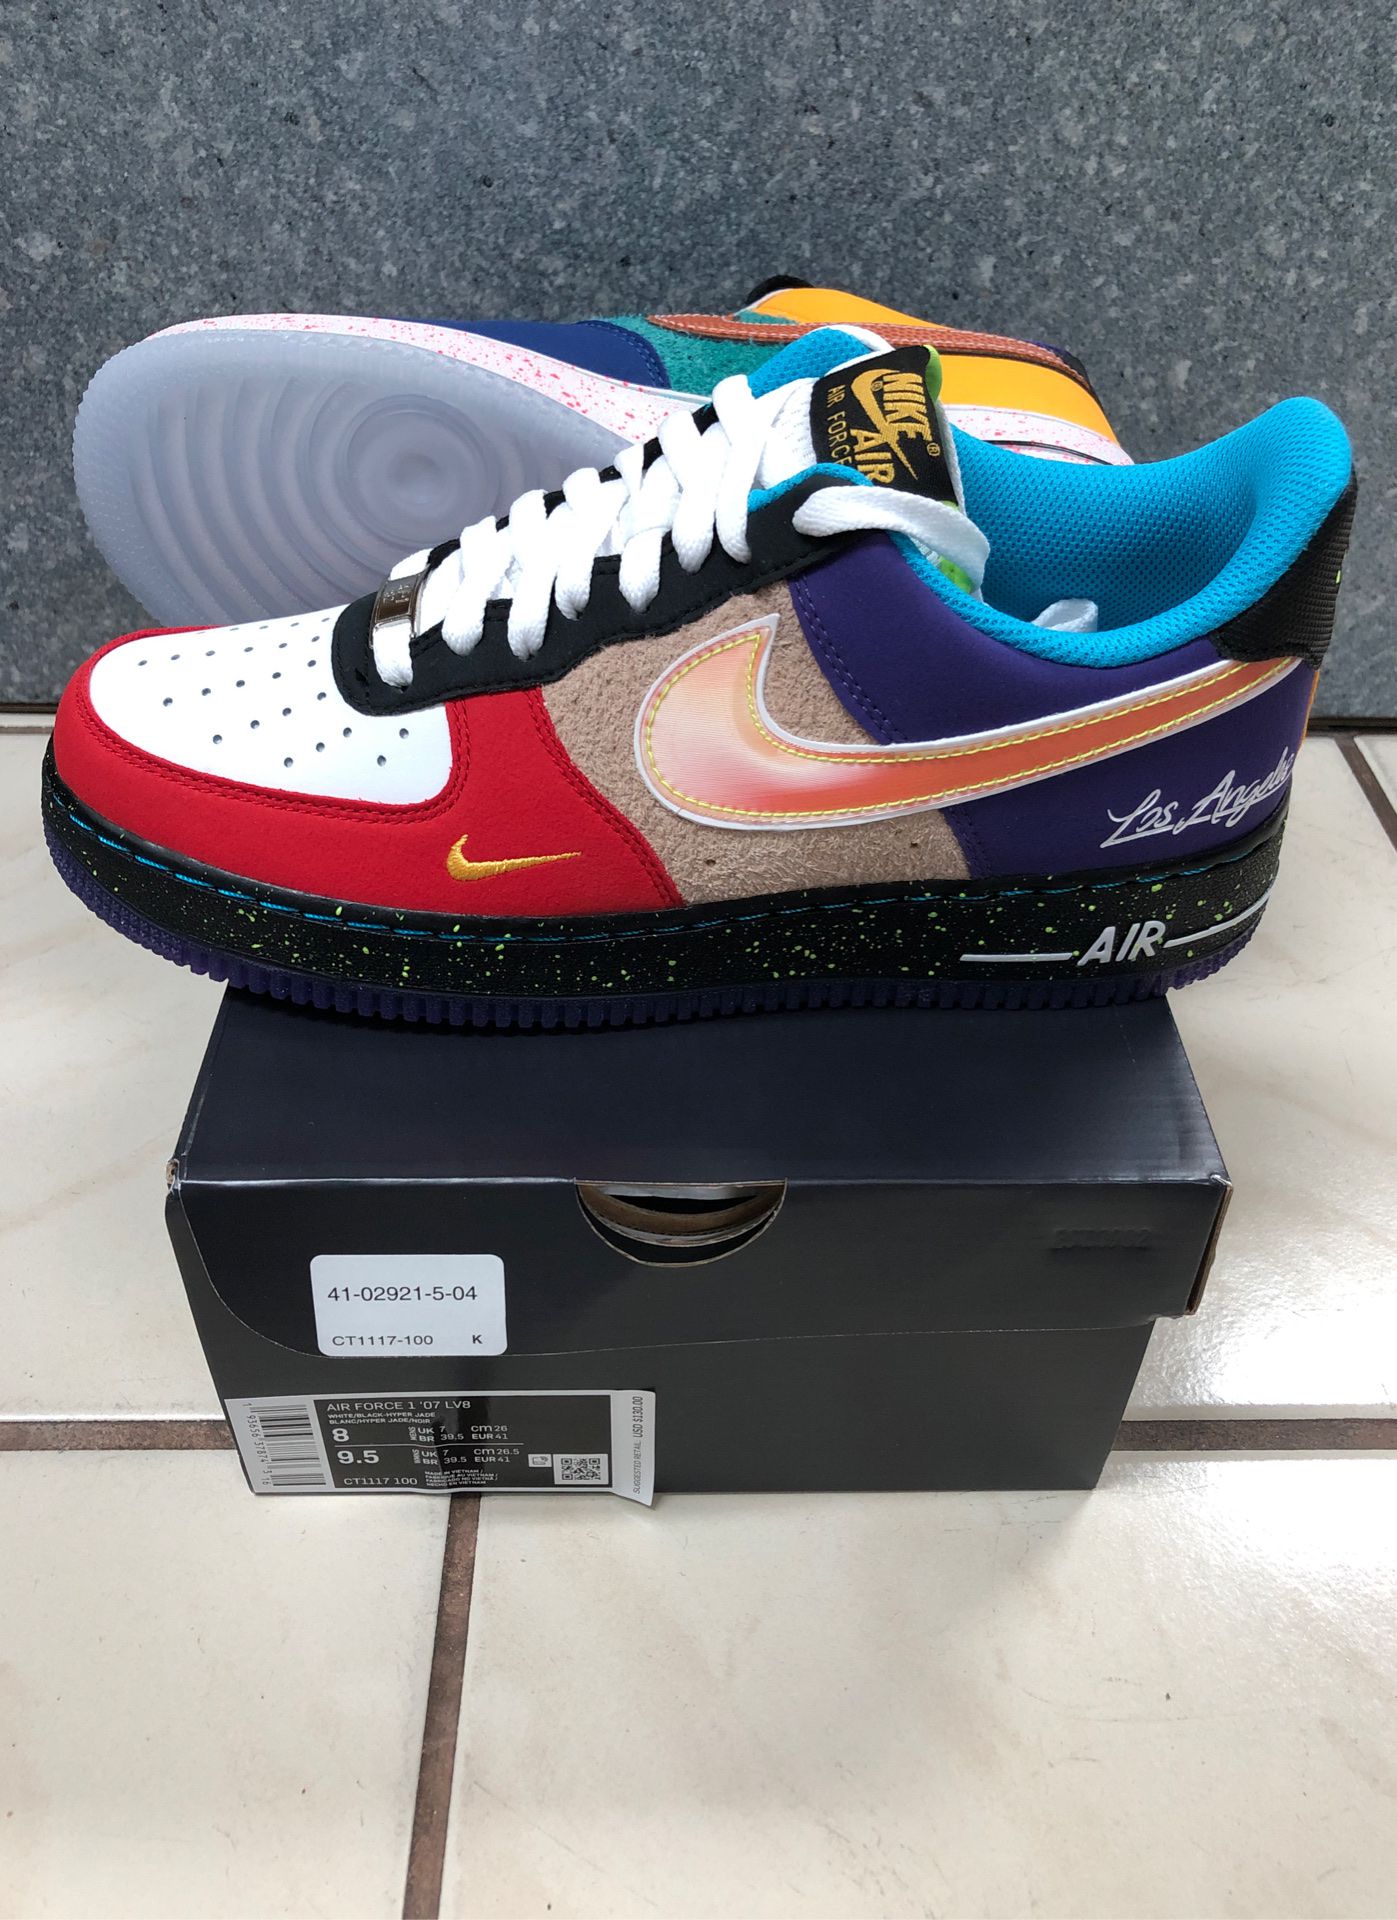 Nike Air Force 1 '07 Lv8 What The La (ct1117 100) 9.5